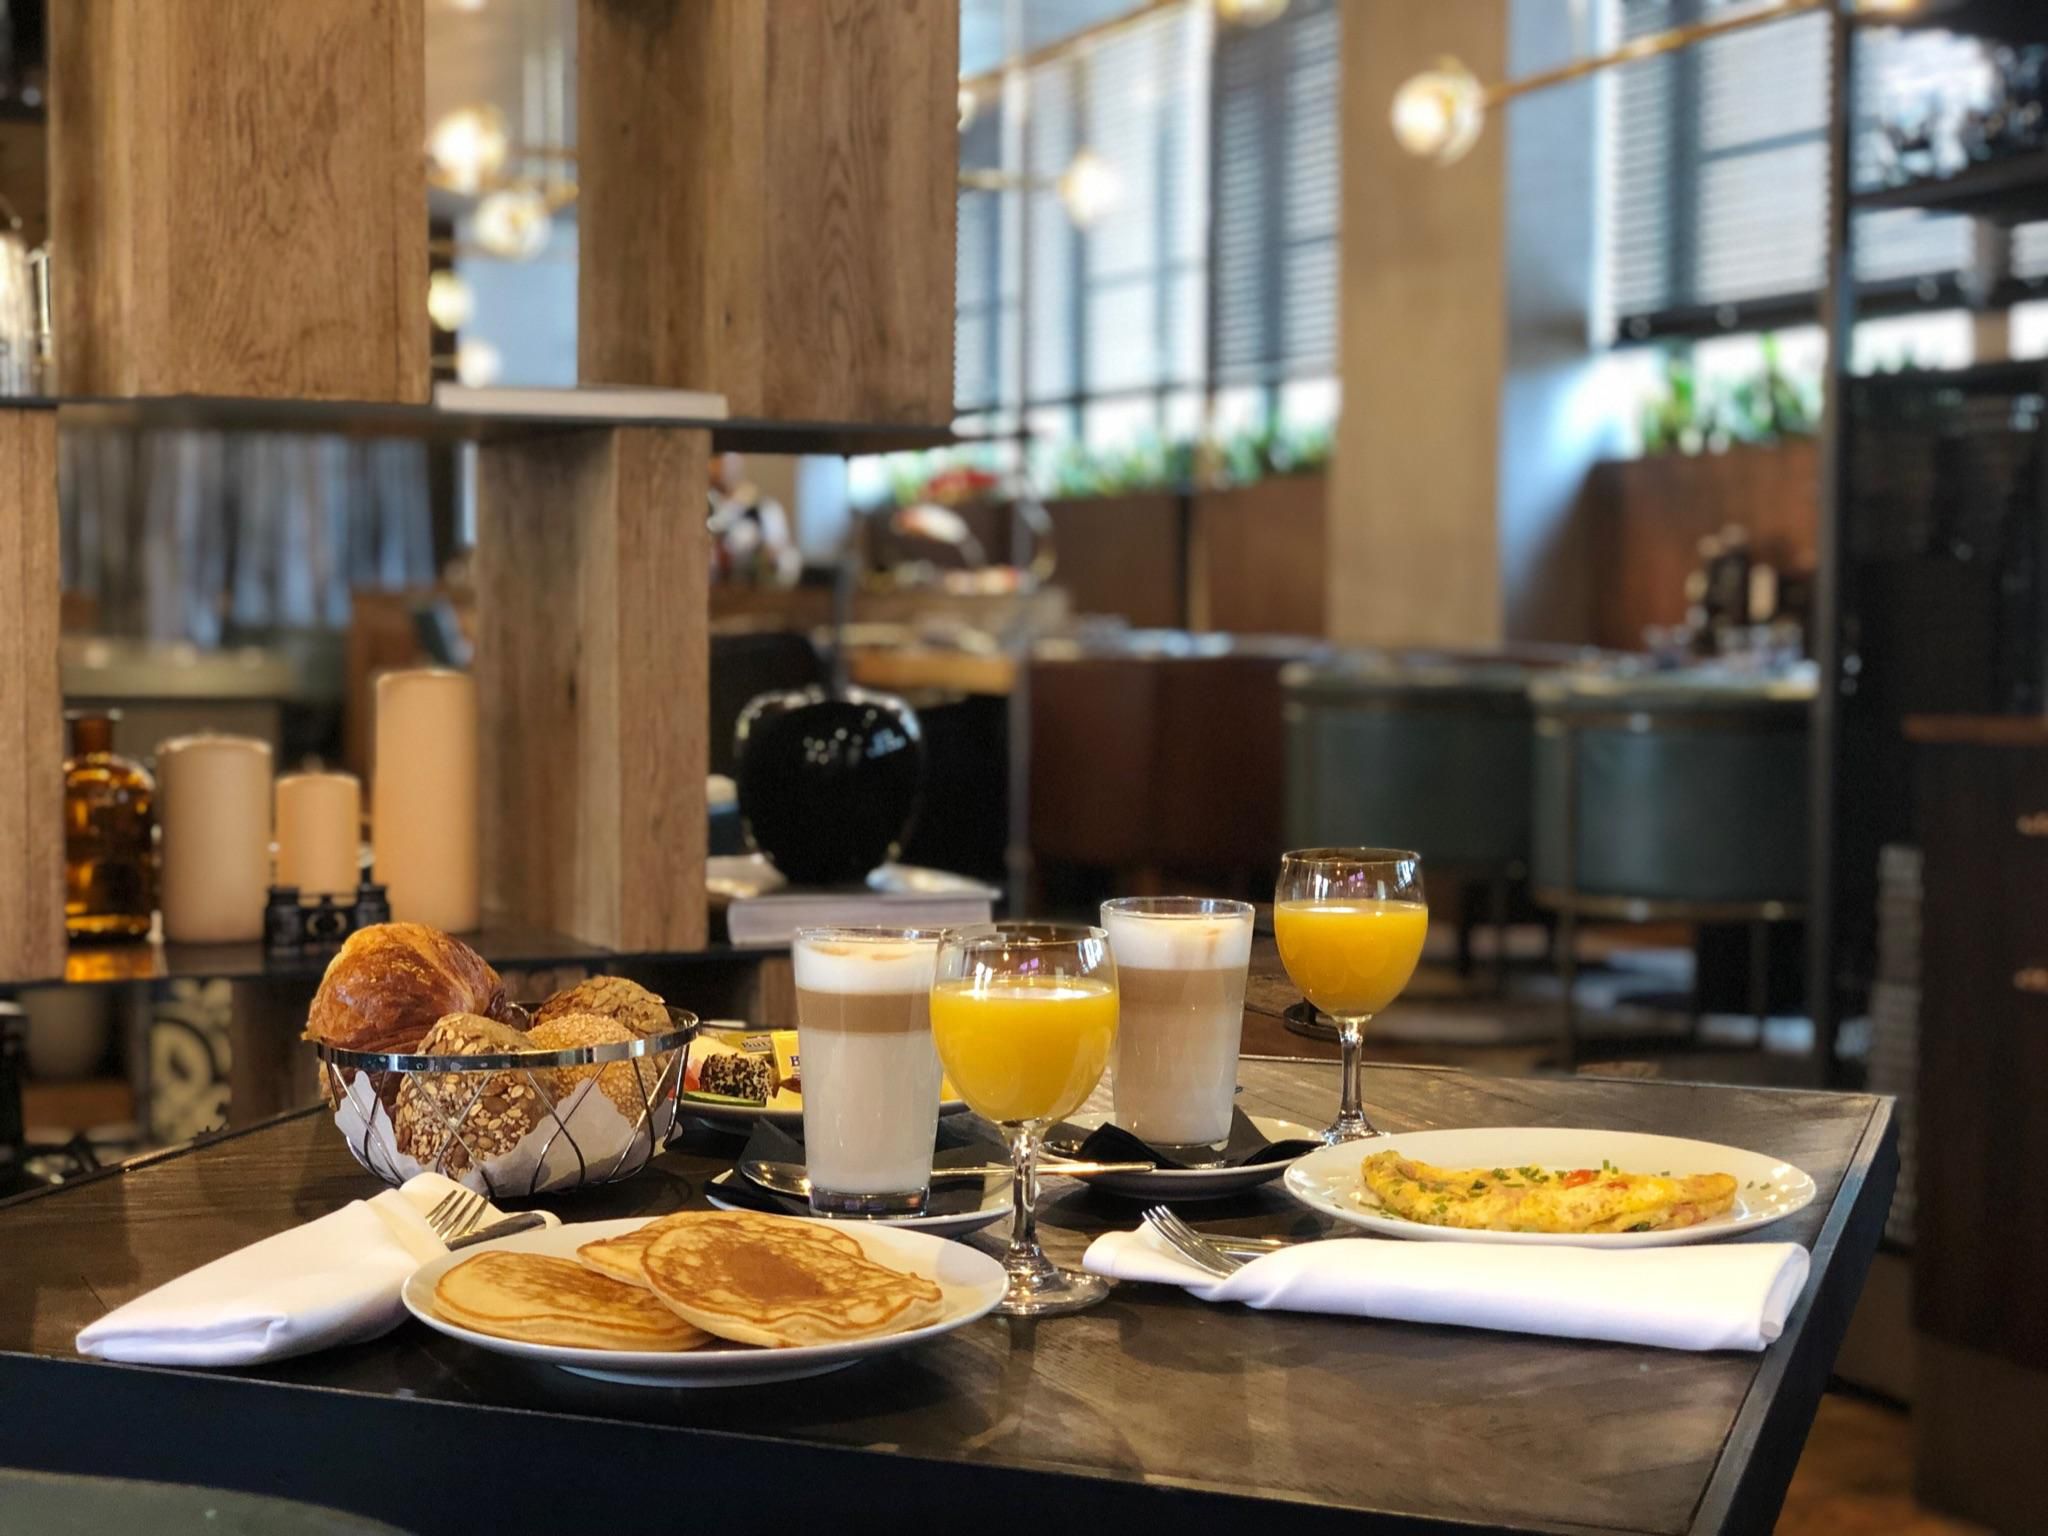 We are delighted to welcome you to our scrumptious breakfast buffet to get your day off to the best star.
Open from Monday to Friday from 7 am to 10 am and  every Saturday and Sunday from 7 am to 11am.